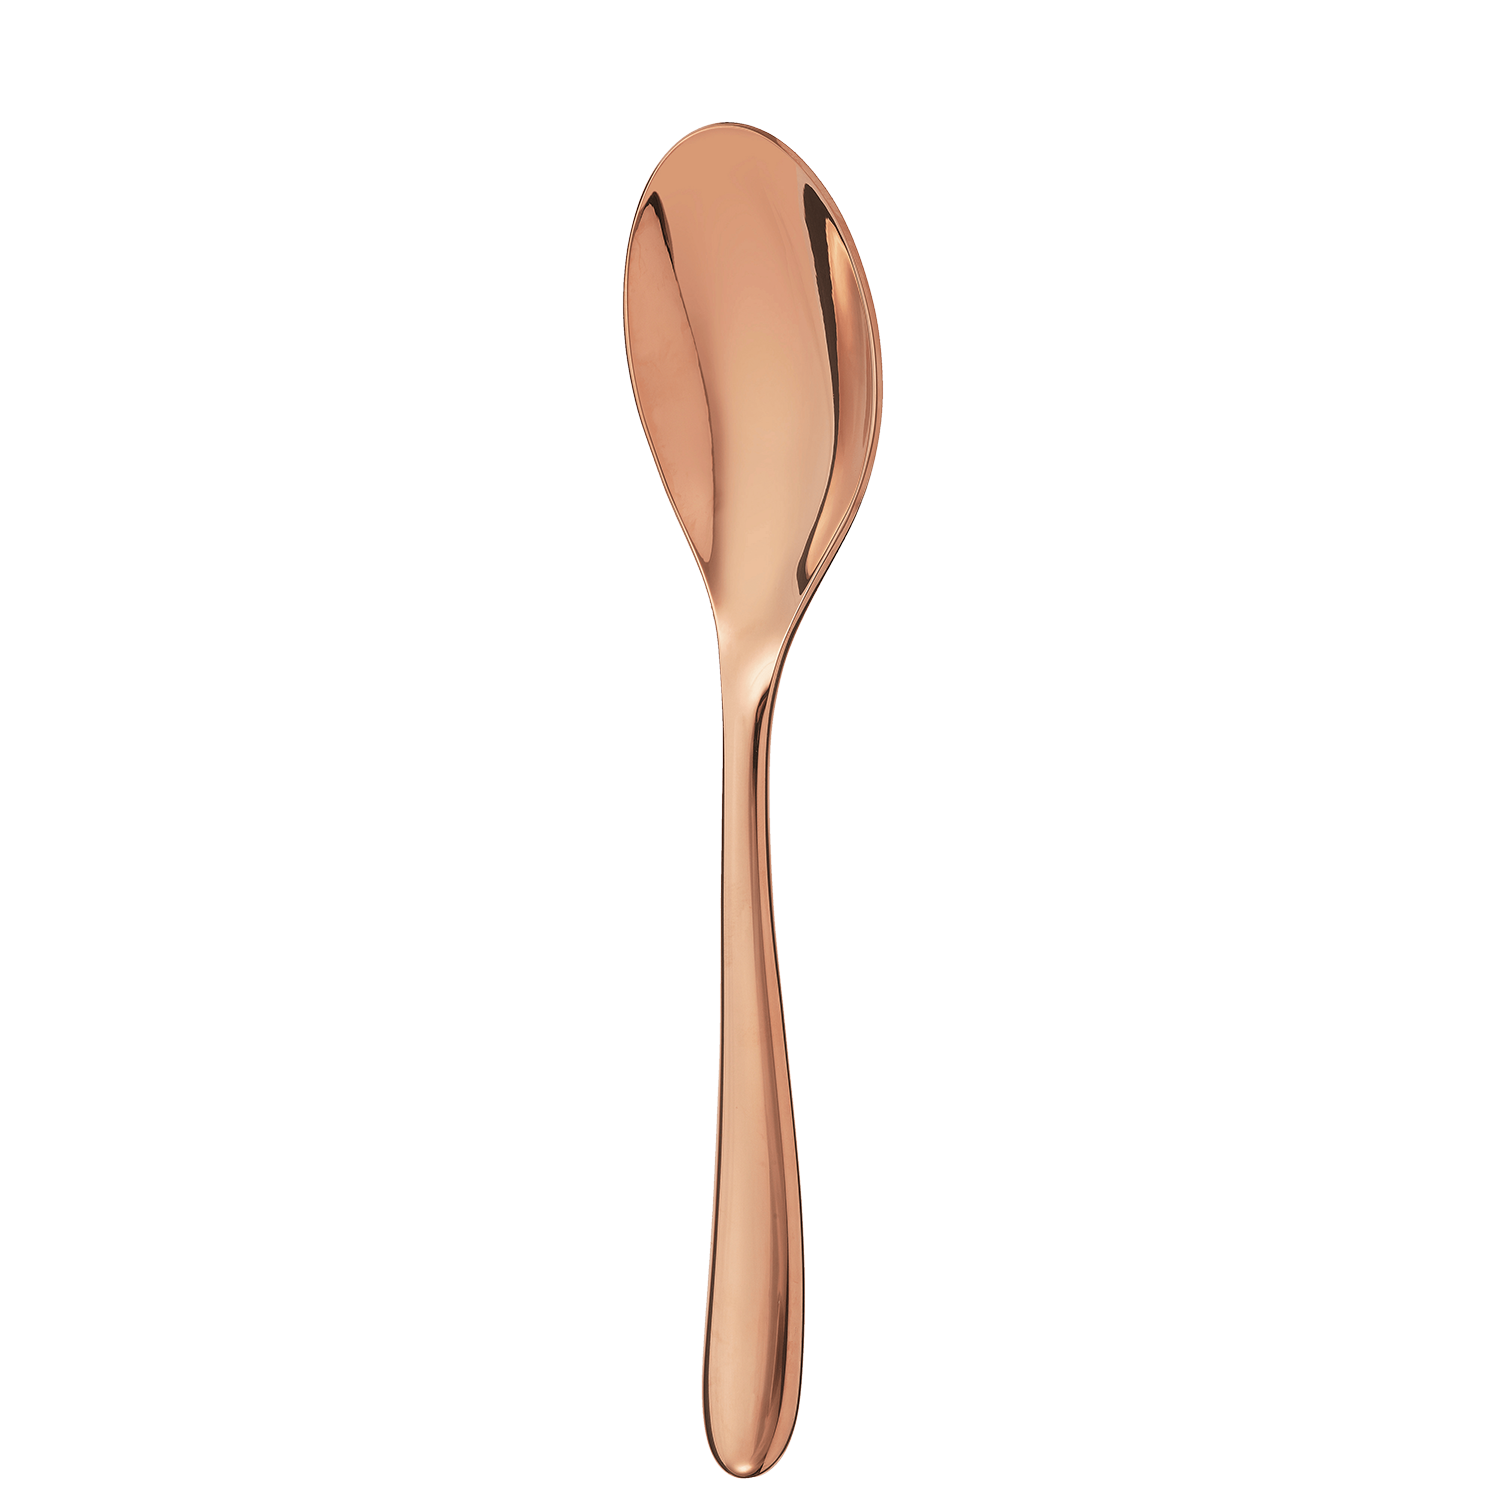 Copper stainless steel soup spoon